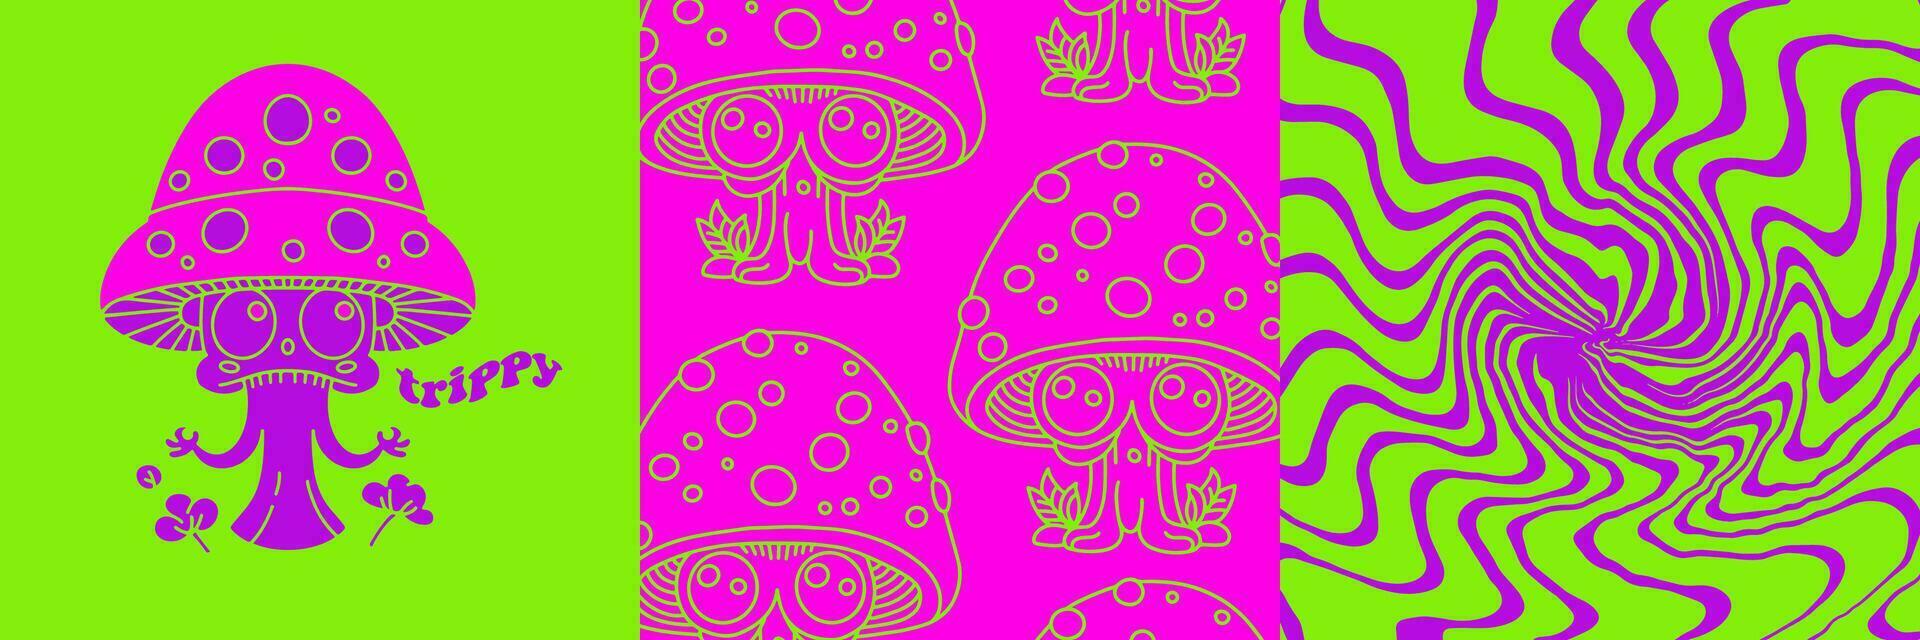 Retro psychedelic hippie posters with trippy mushrooms and fluid acid background. 70s abstract covers with crazy fungus. Bright alien characters. Vector design.